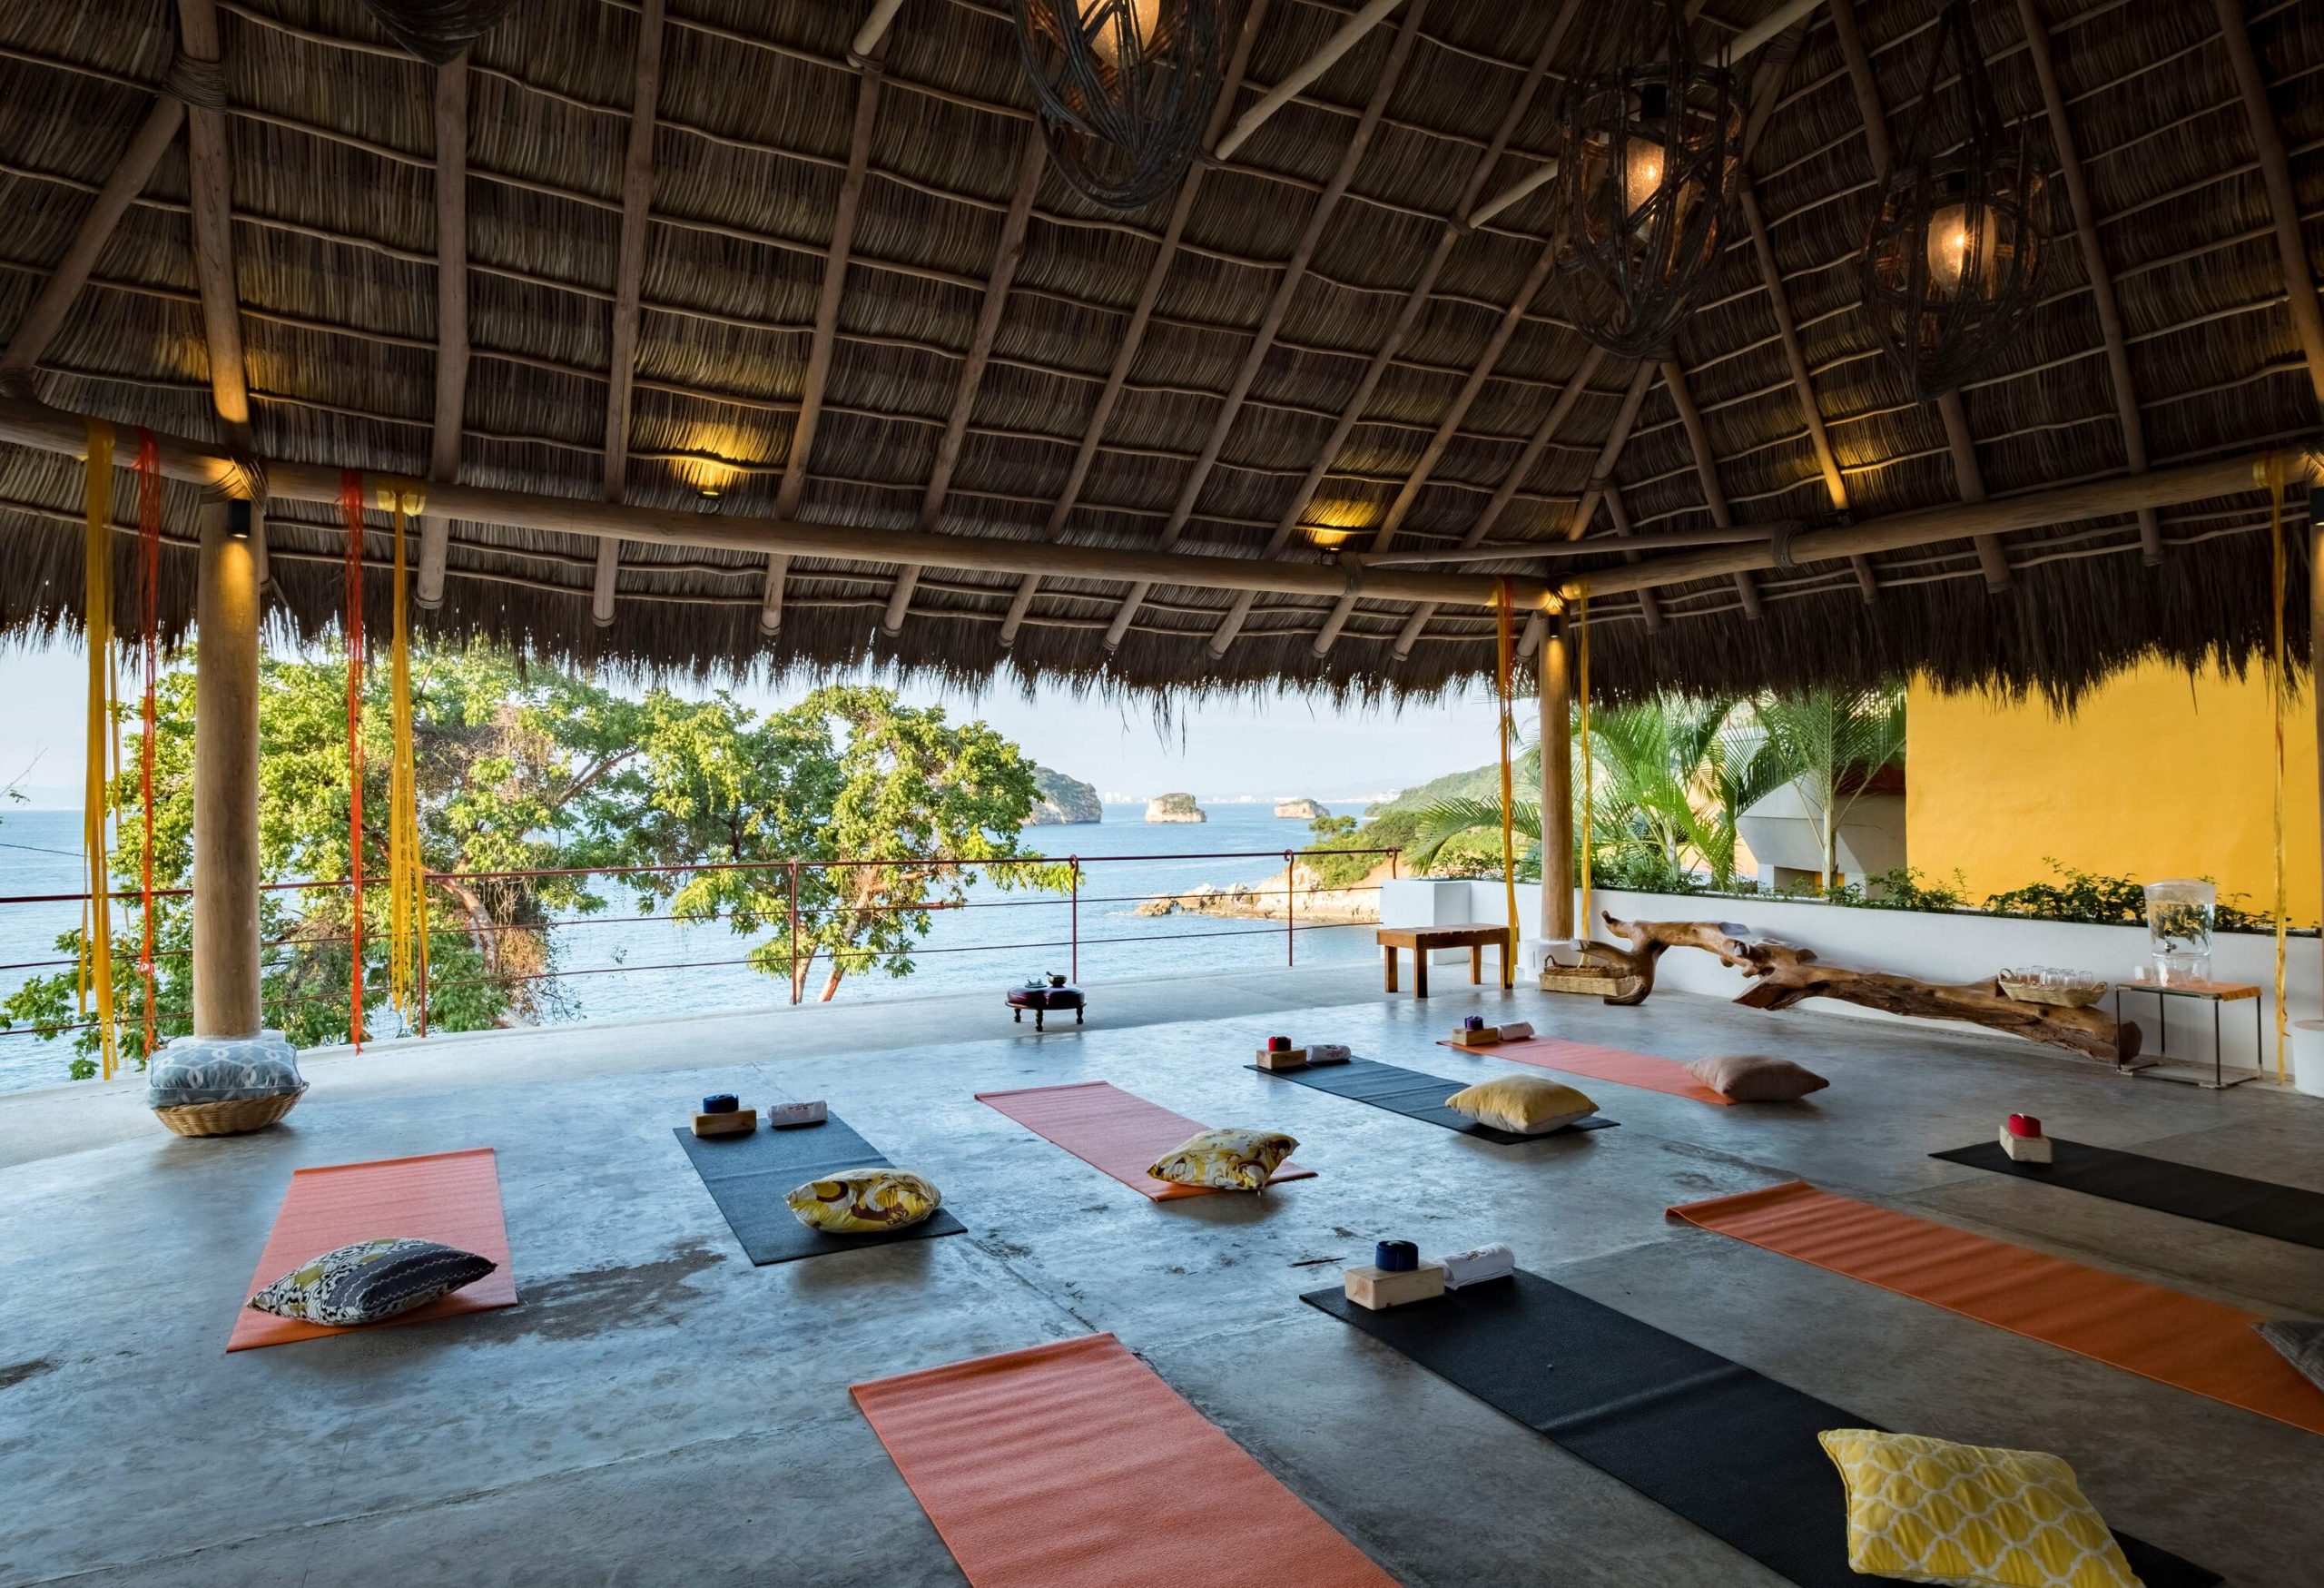 An empty open yoga studio with a thatched roof overlooking the sea.